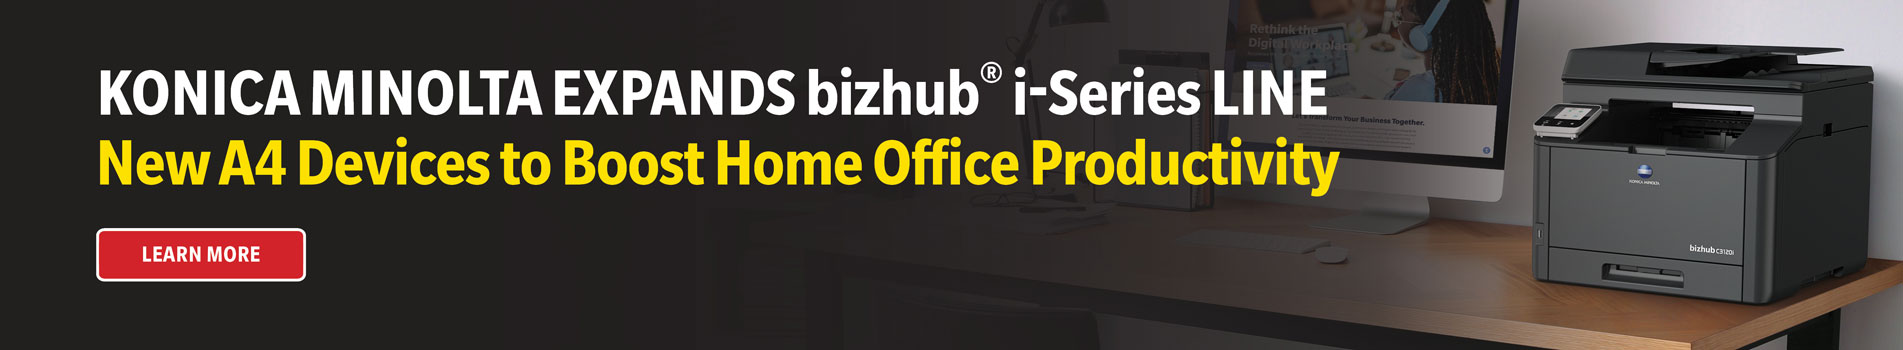 Konica Minolta Expands bizhub i-Series Line with New A4 Devices to Boost Productivity in the Home Office